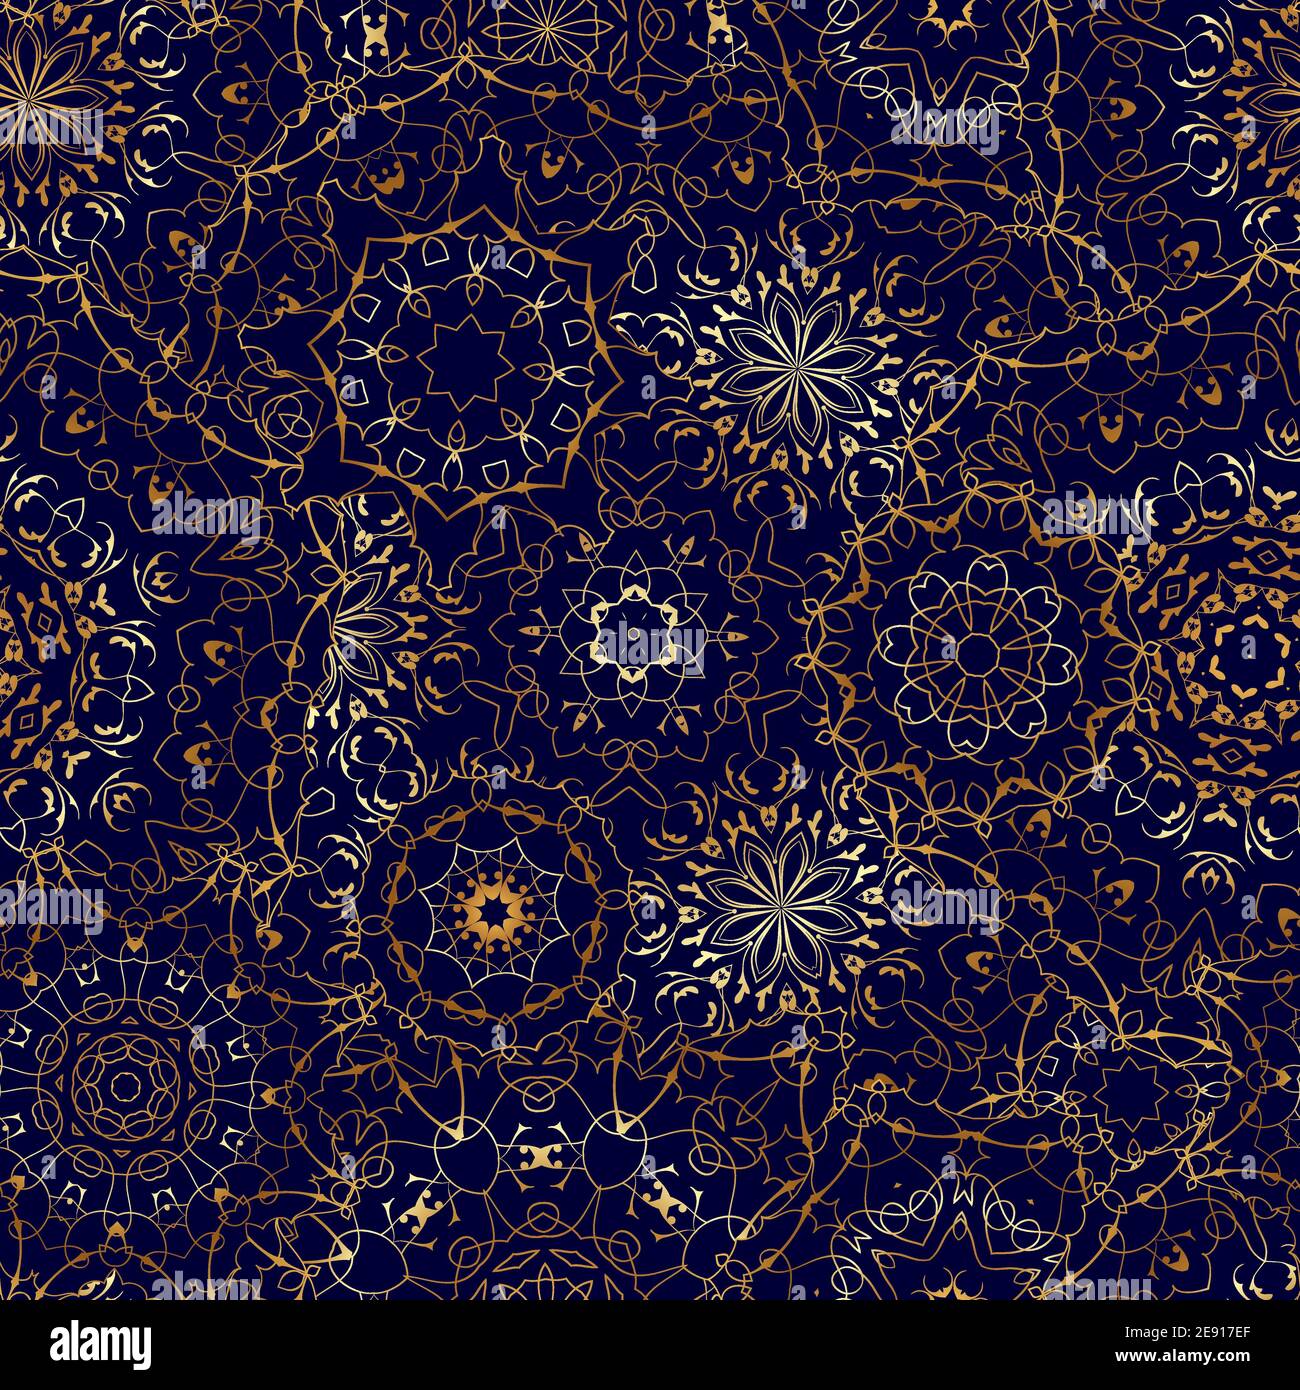 Seamless pattern with golden mandala on dark blue background. Arabic golden ornament for printing on fabric or paper. Stock Vector